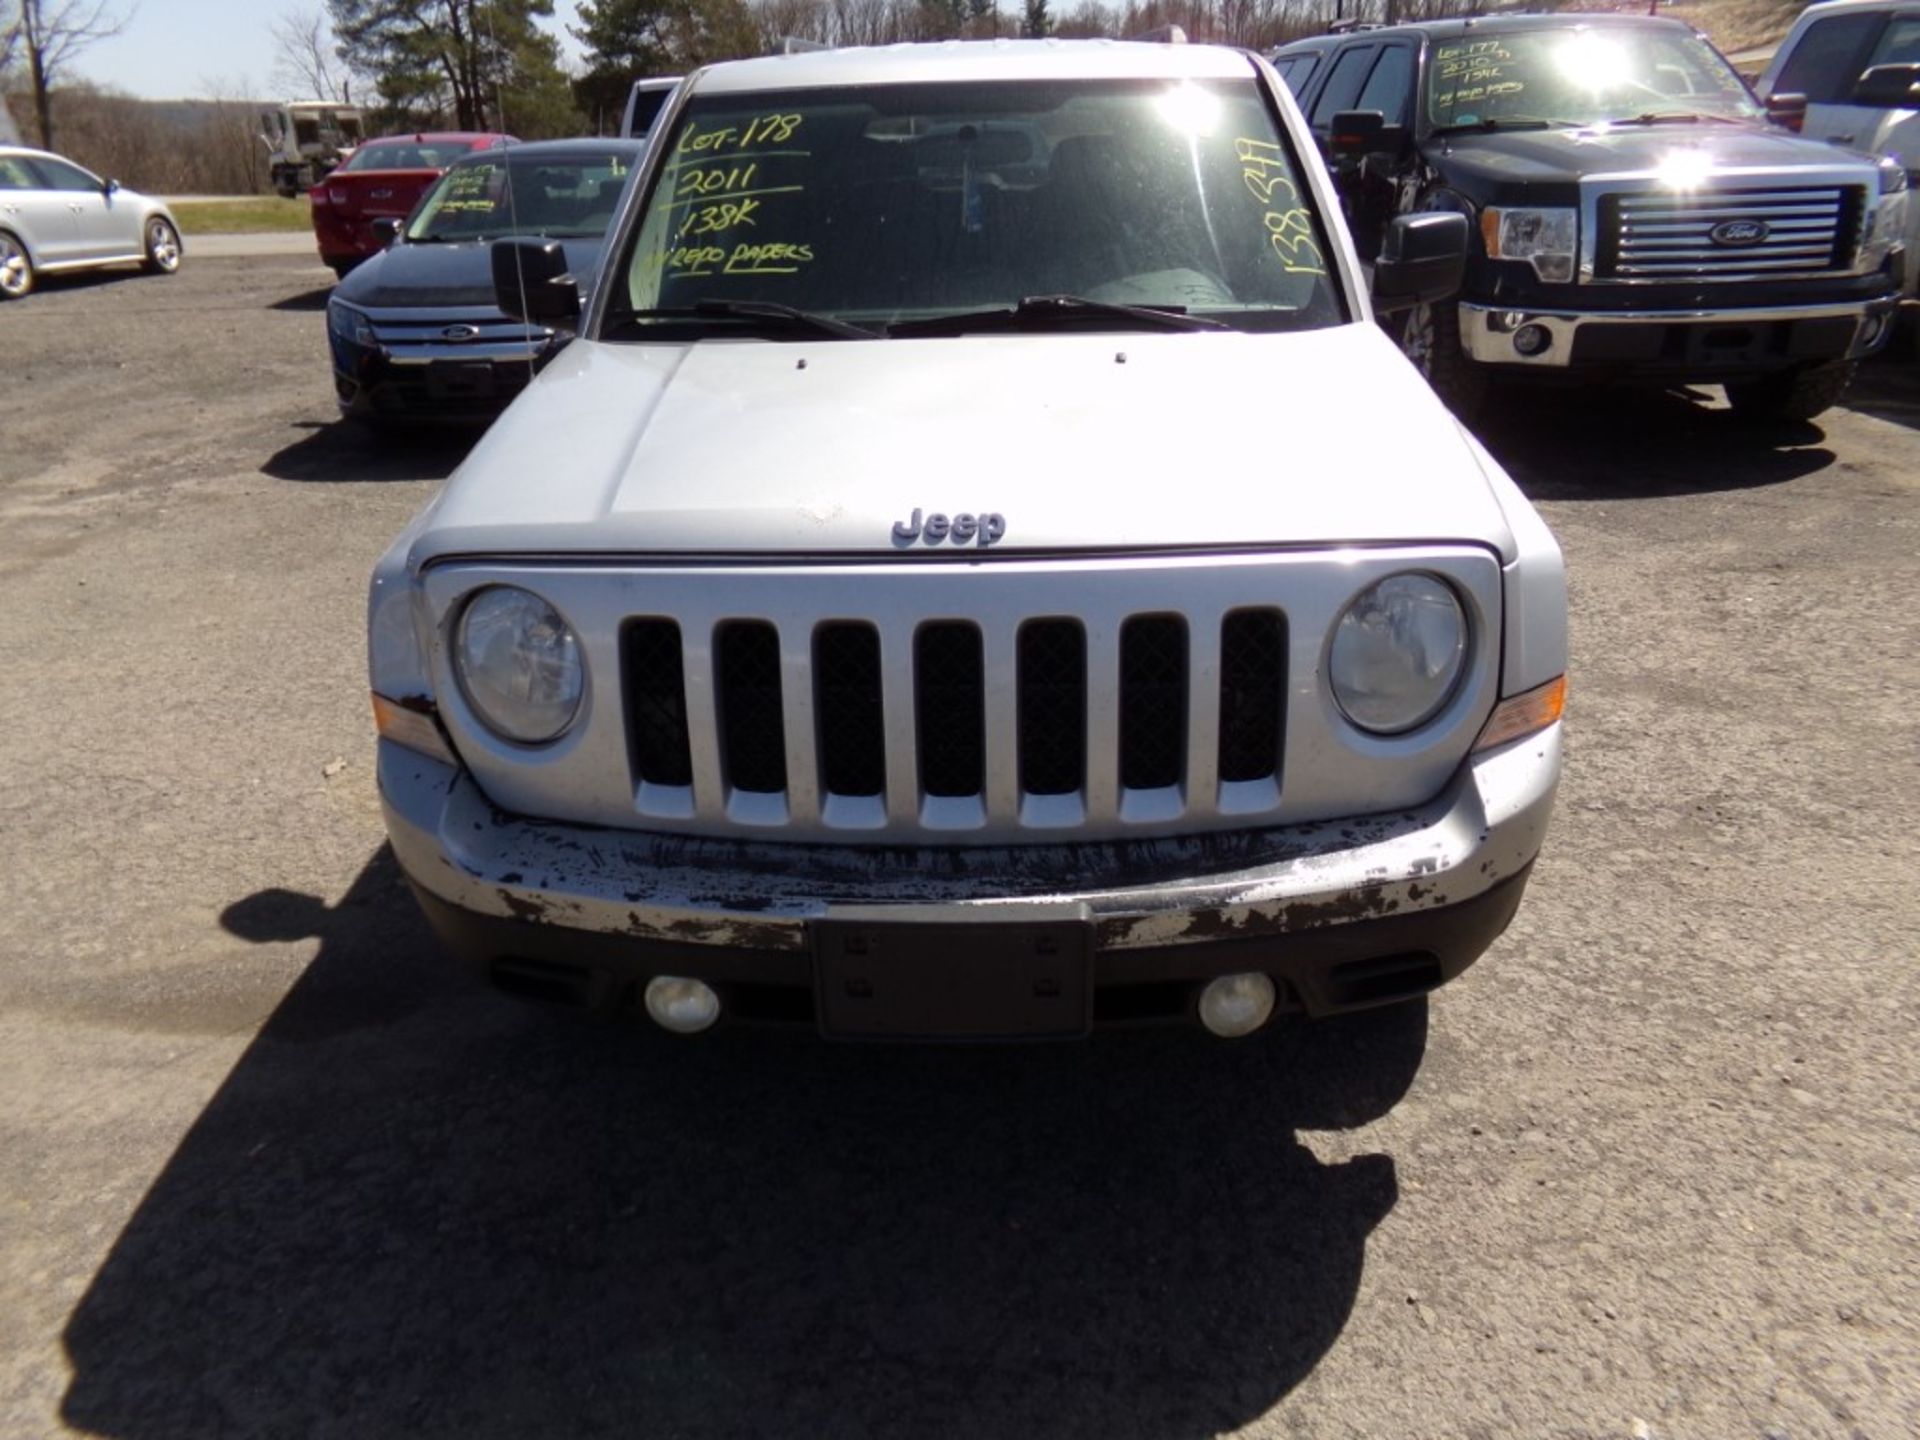 2011 Jeep Patriot Latitude 4x4, Silver, 138,349 Miles, VIN#:1J4NF1GB3BD277734, ENGINE NOISE, - Image 3 of 6